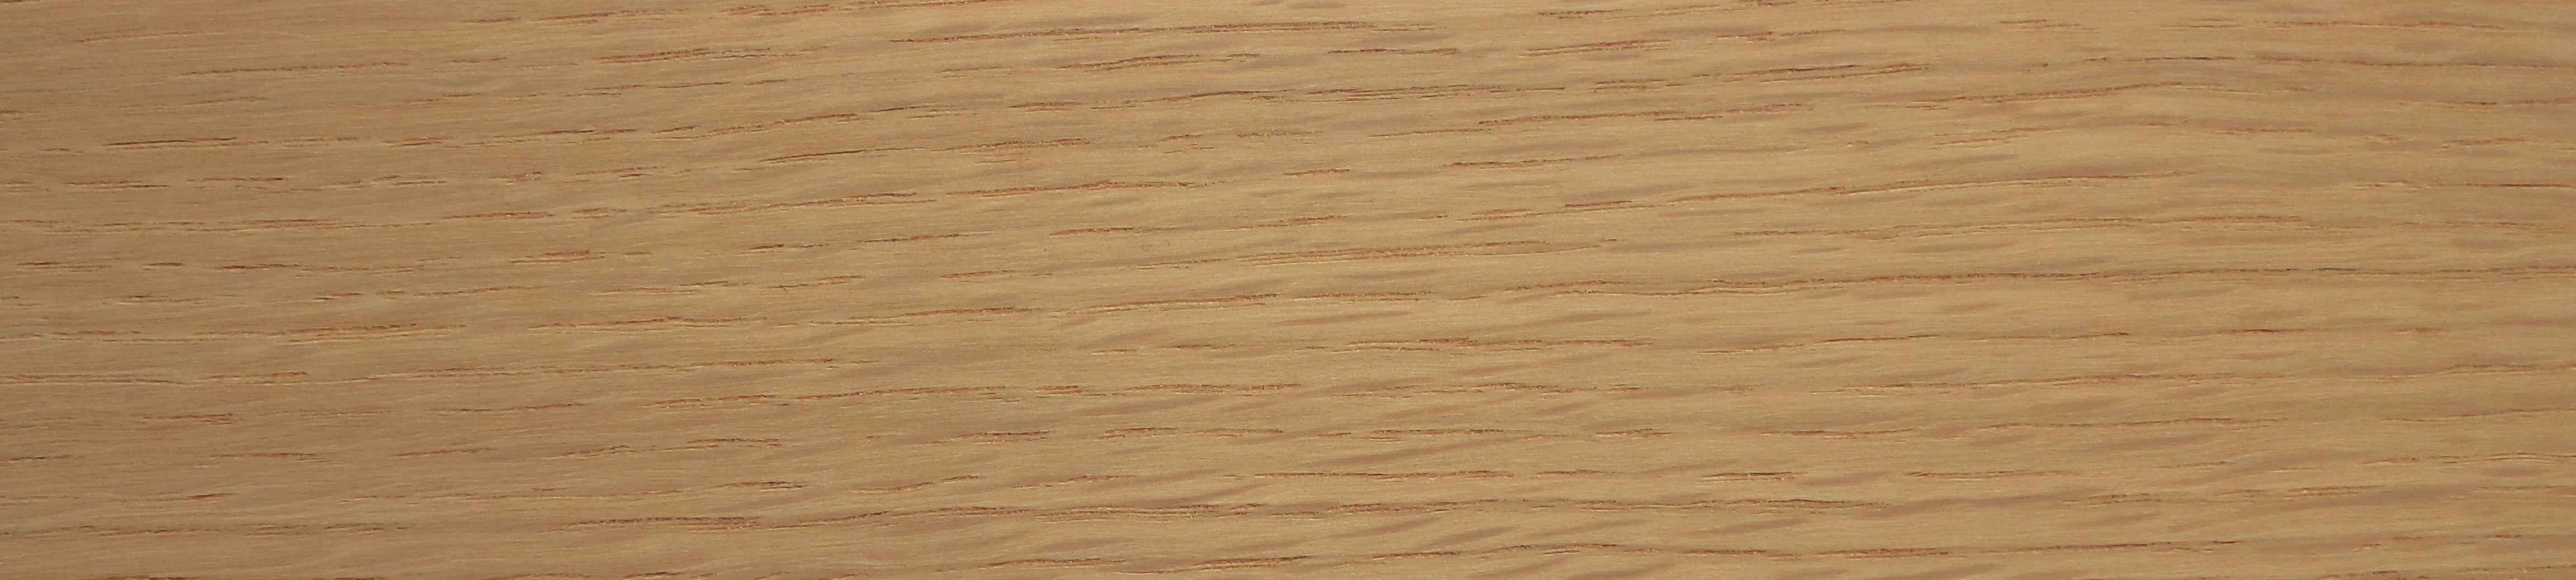 Oak UNGLUED Edging 22mm x 0.5mm - Various Lengths Available